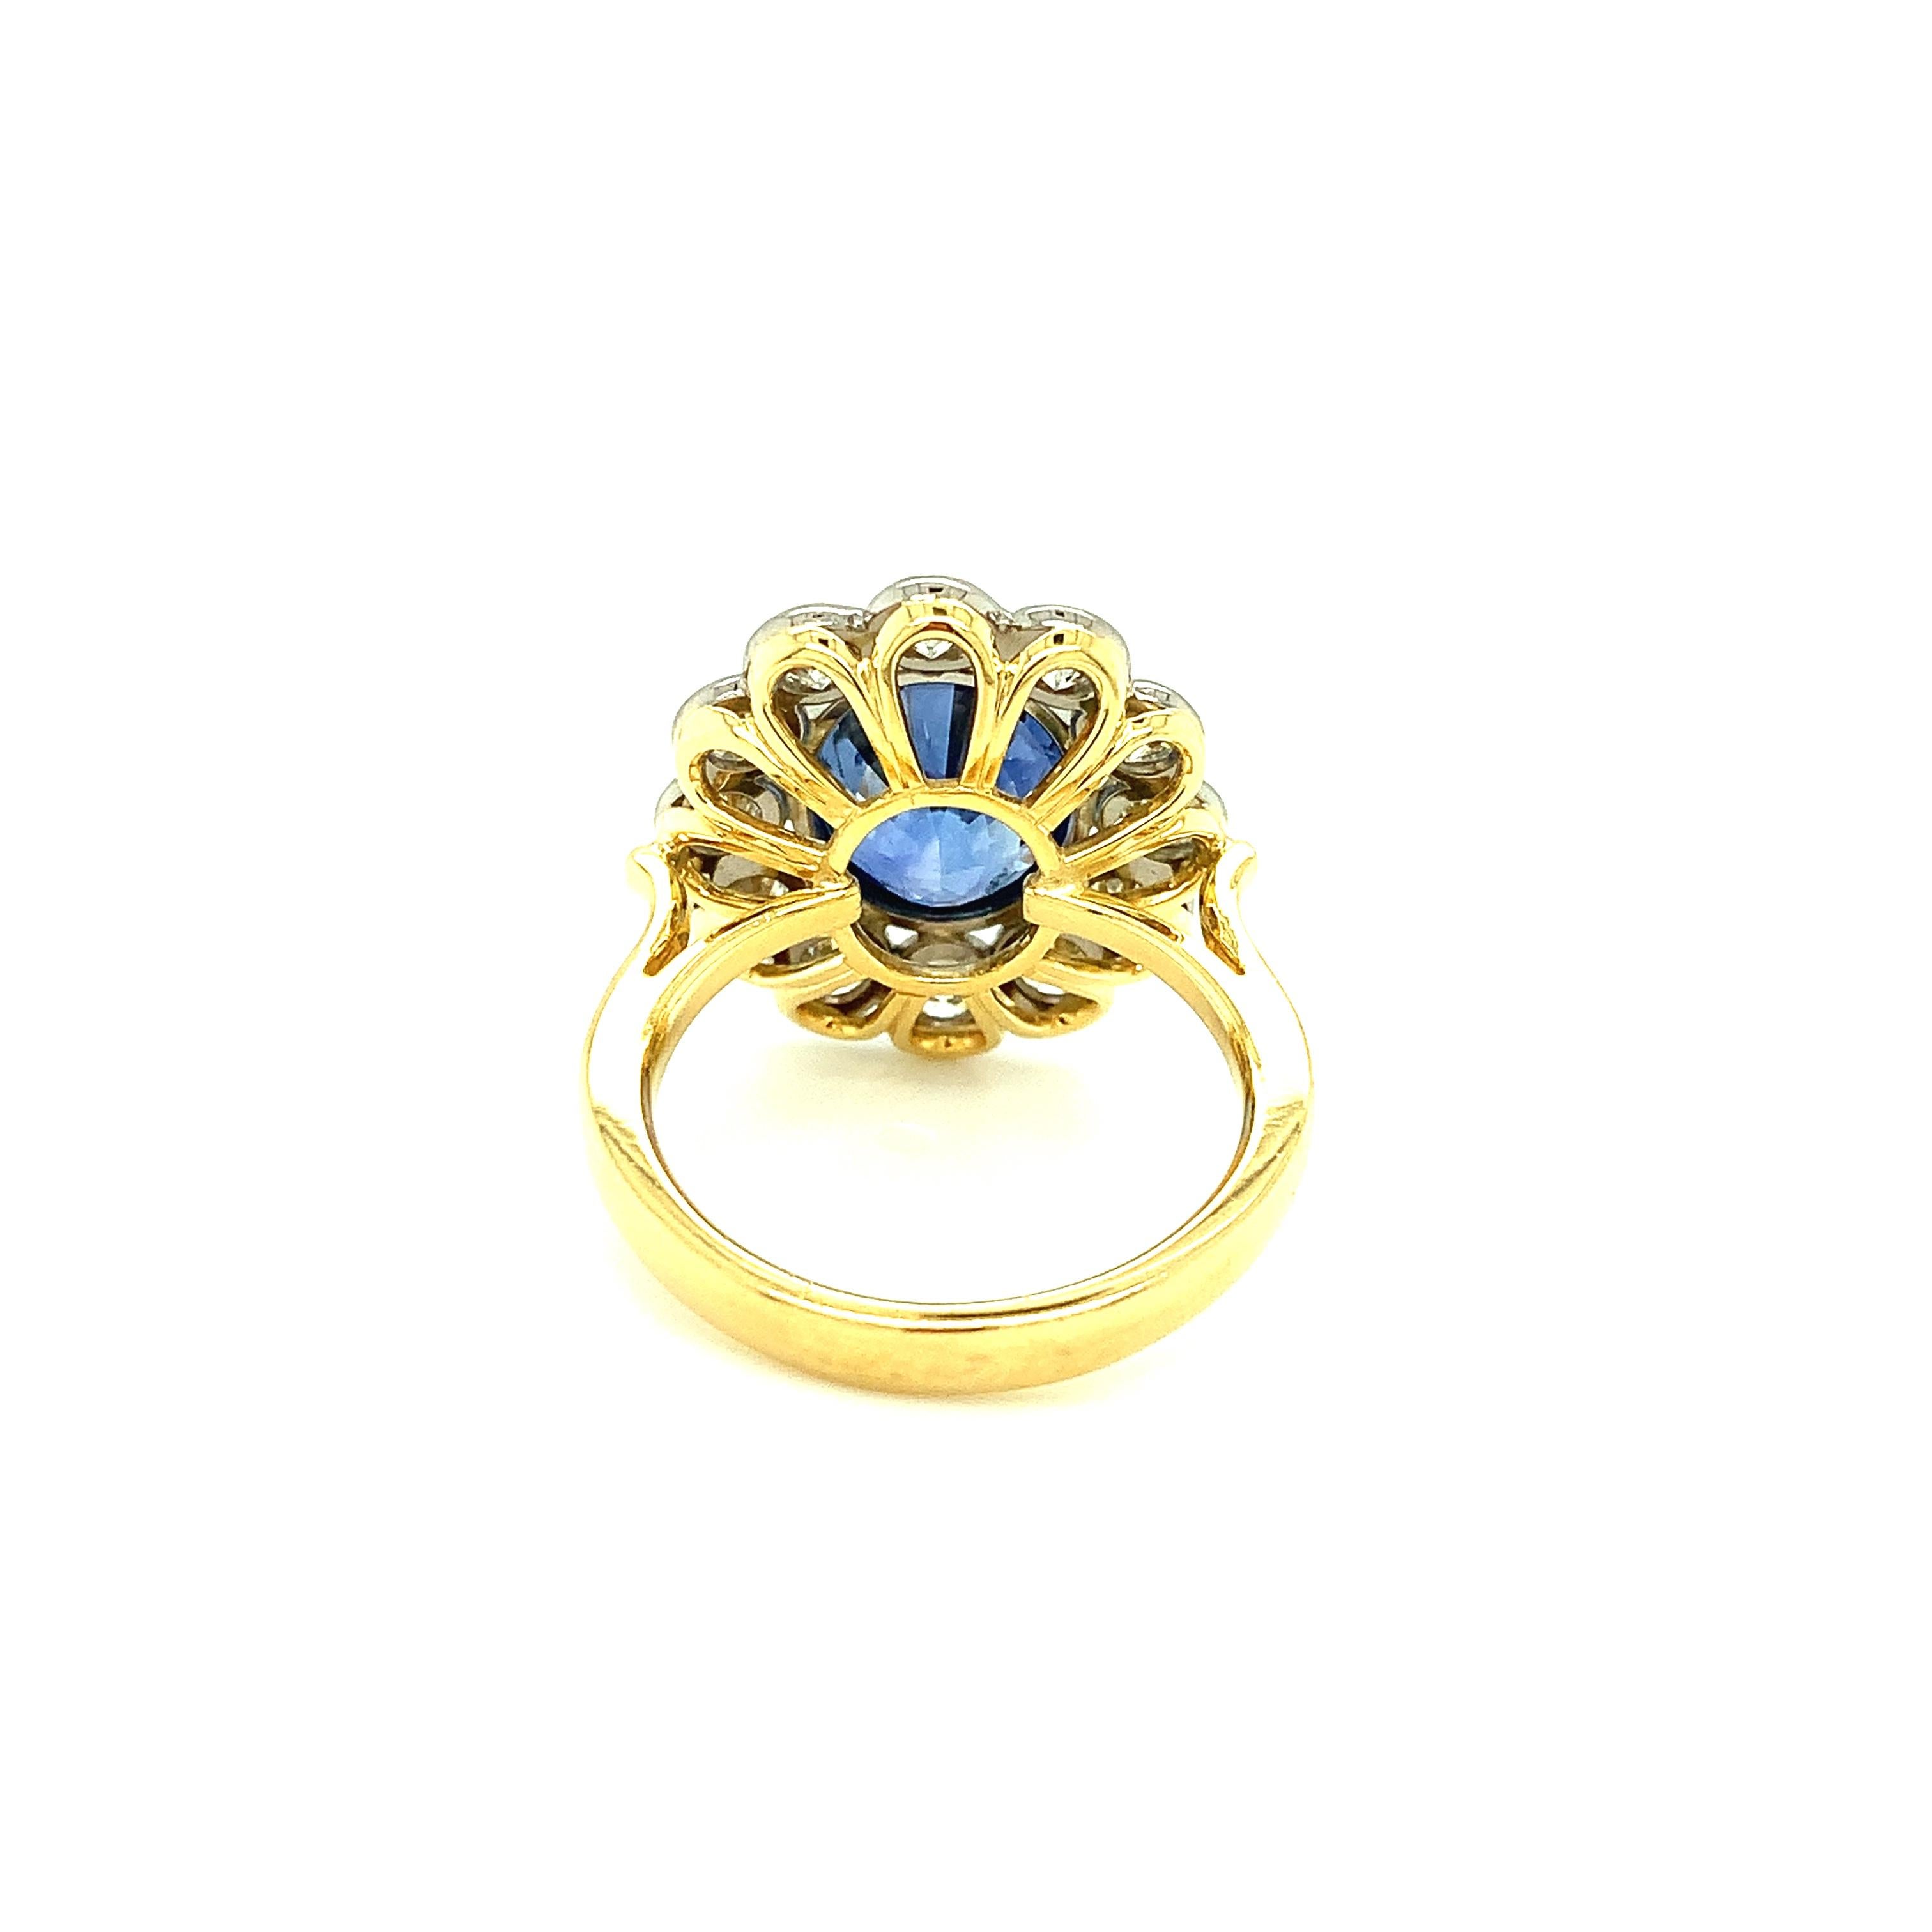 Women's 6.67 Carat Cornflower Blue Sapphire and Diamond Cocktail Ring in 18k Gold For Sale